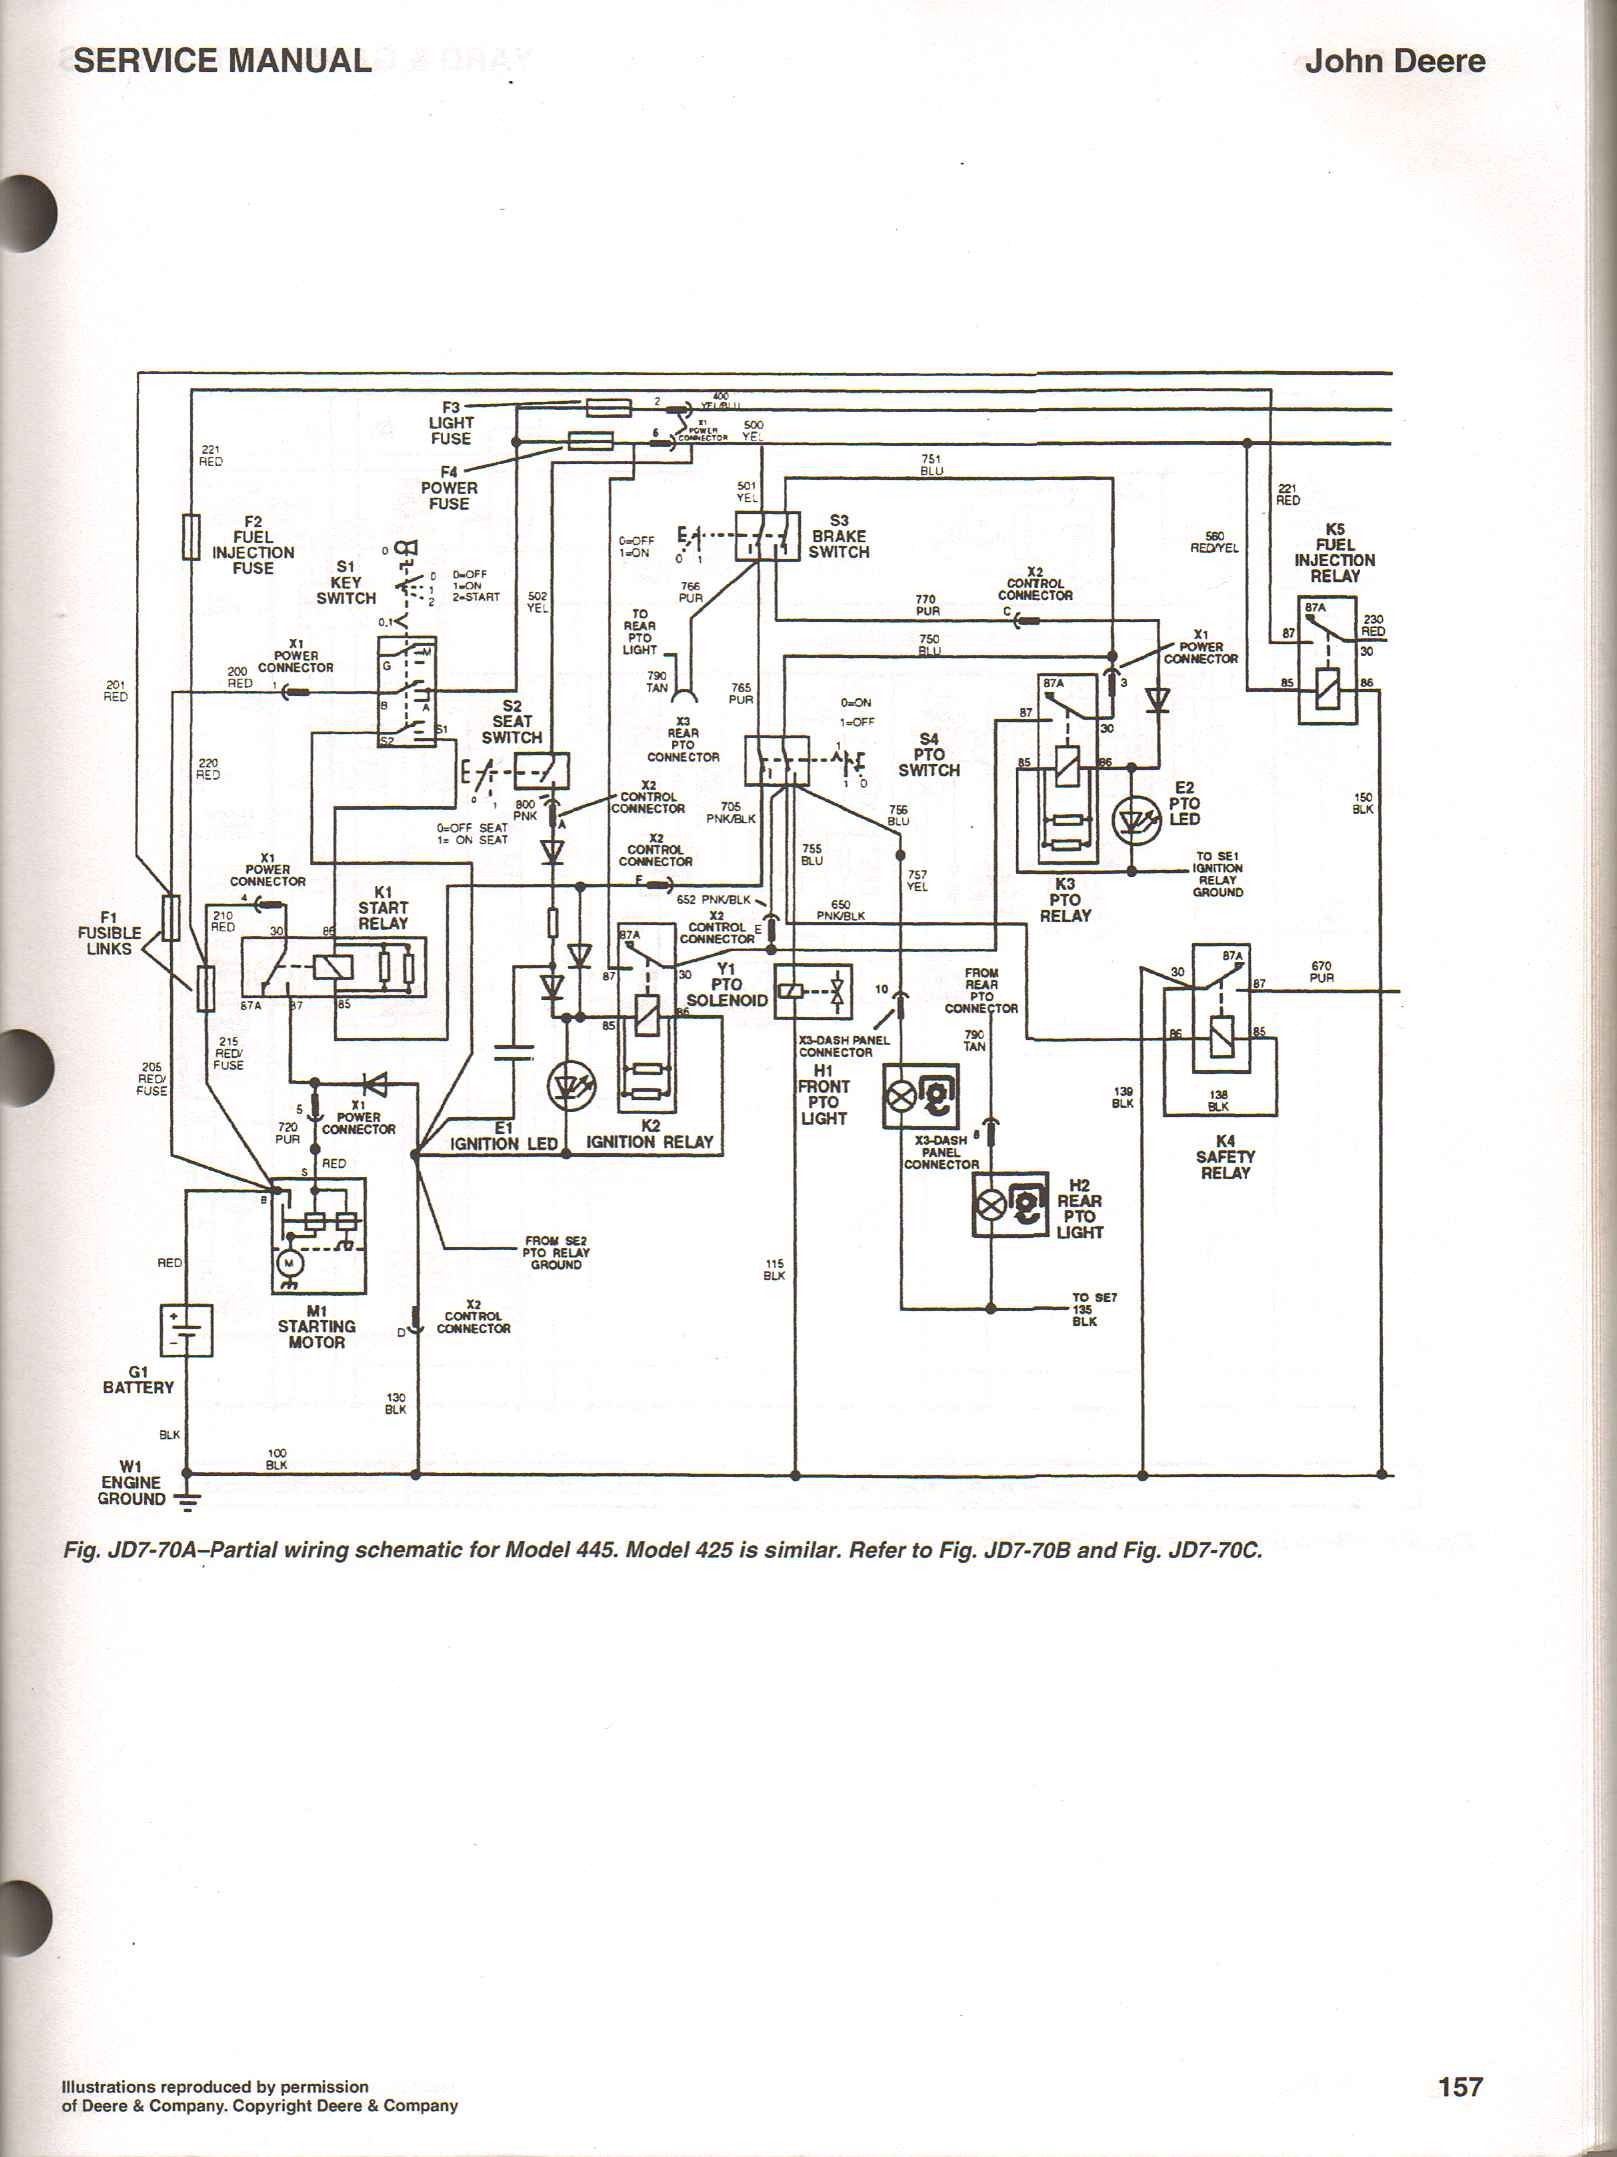 Wiring Diagram for A 345 John Deere Tractor Re Deere 345 Lawn and Garden Tractor Pto Will Not Engage Used Tractor to Mow Previous Day Of Wiring Diagram for A 345 John Deere Tractor